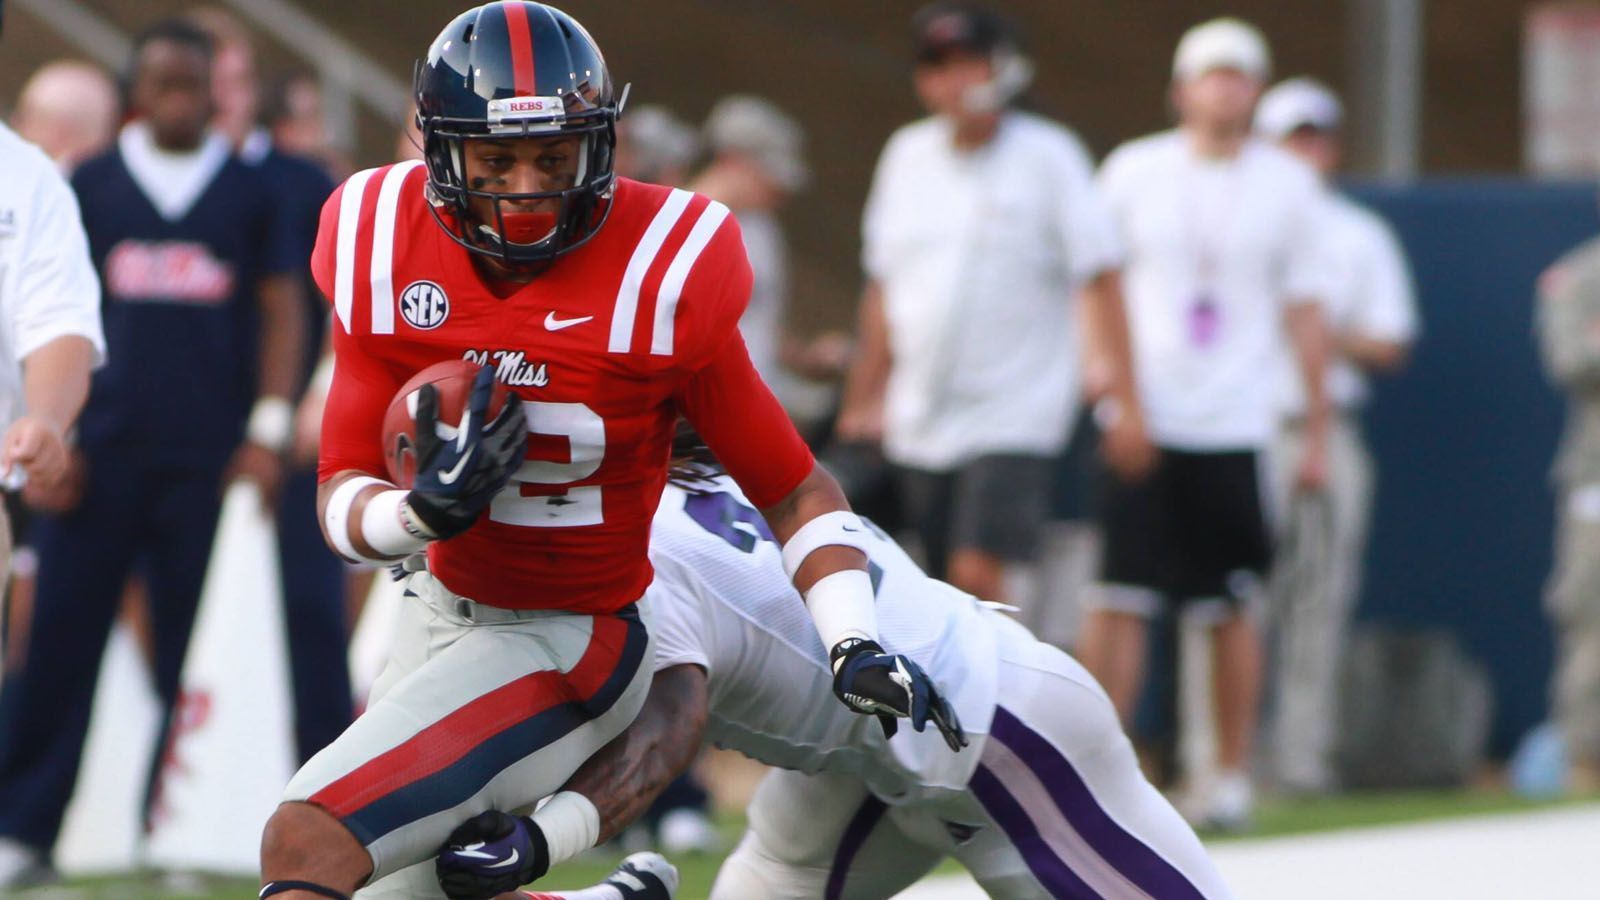 
                <strong>Donte Moncrief (Pittsburgh Steelers)</strong><br>
                College: Ole Miss RebelsPosition: Wide ReceiverCollege-Stats: 2371 YDS - 20 TD - 156 RECIn der NFL seit: 2014
              